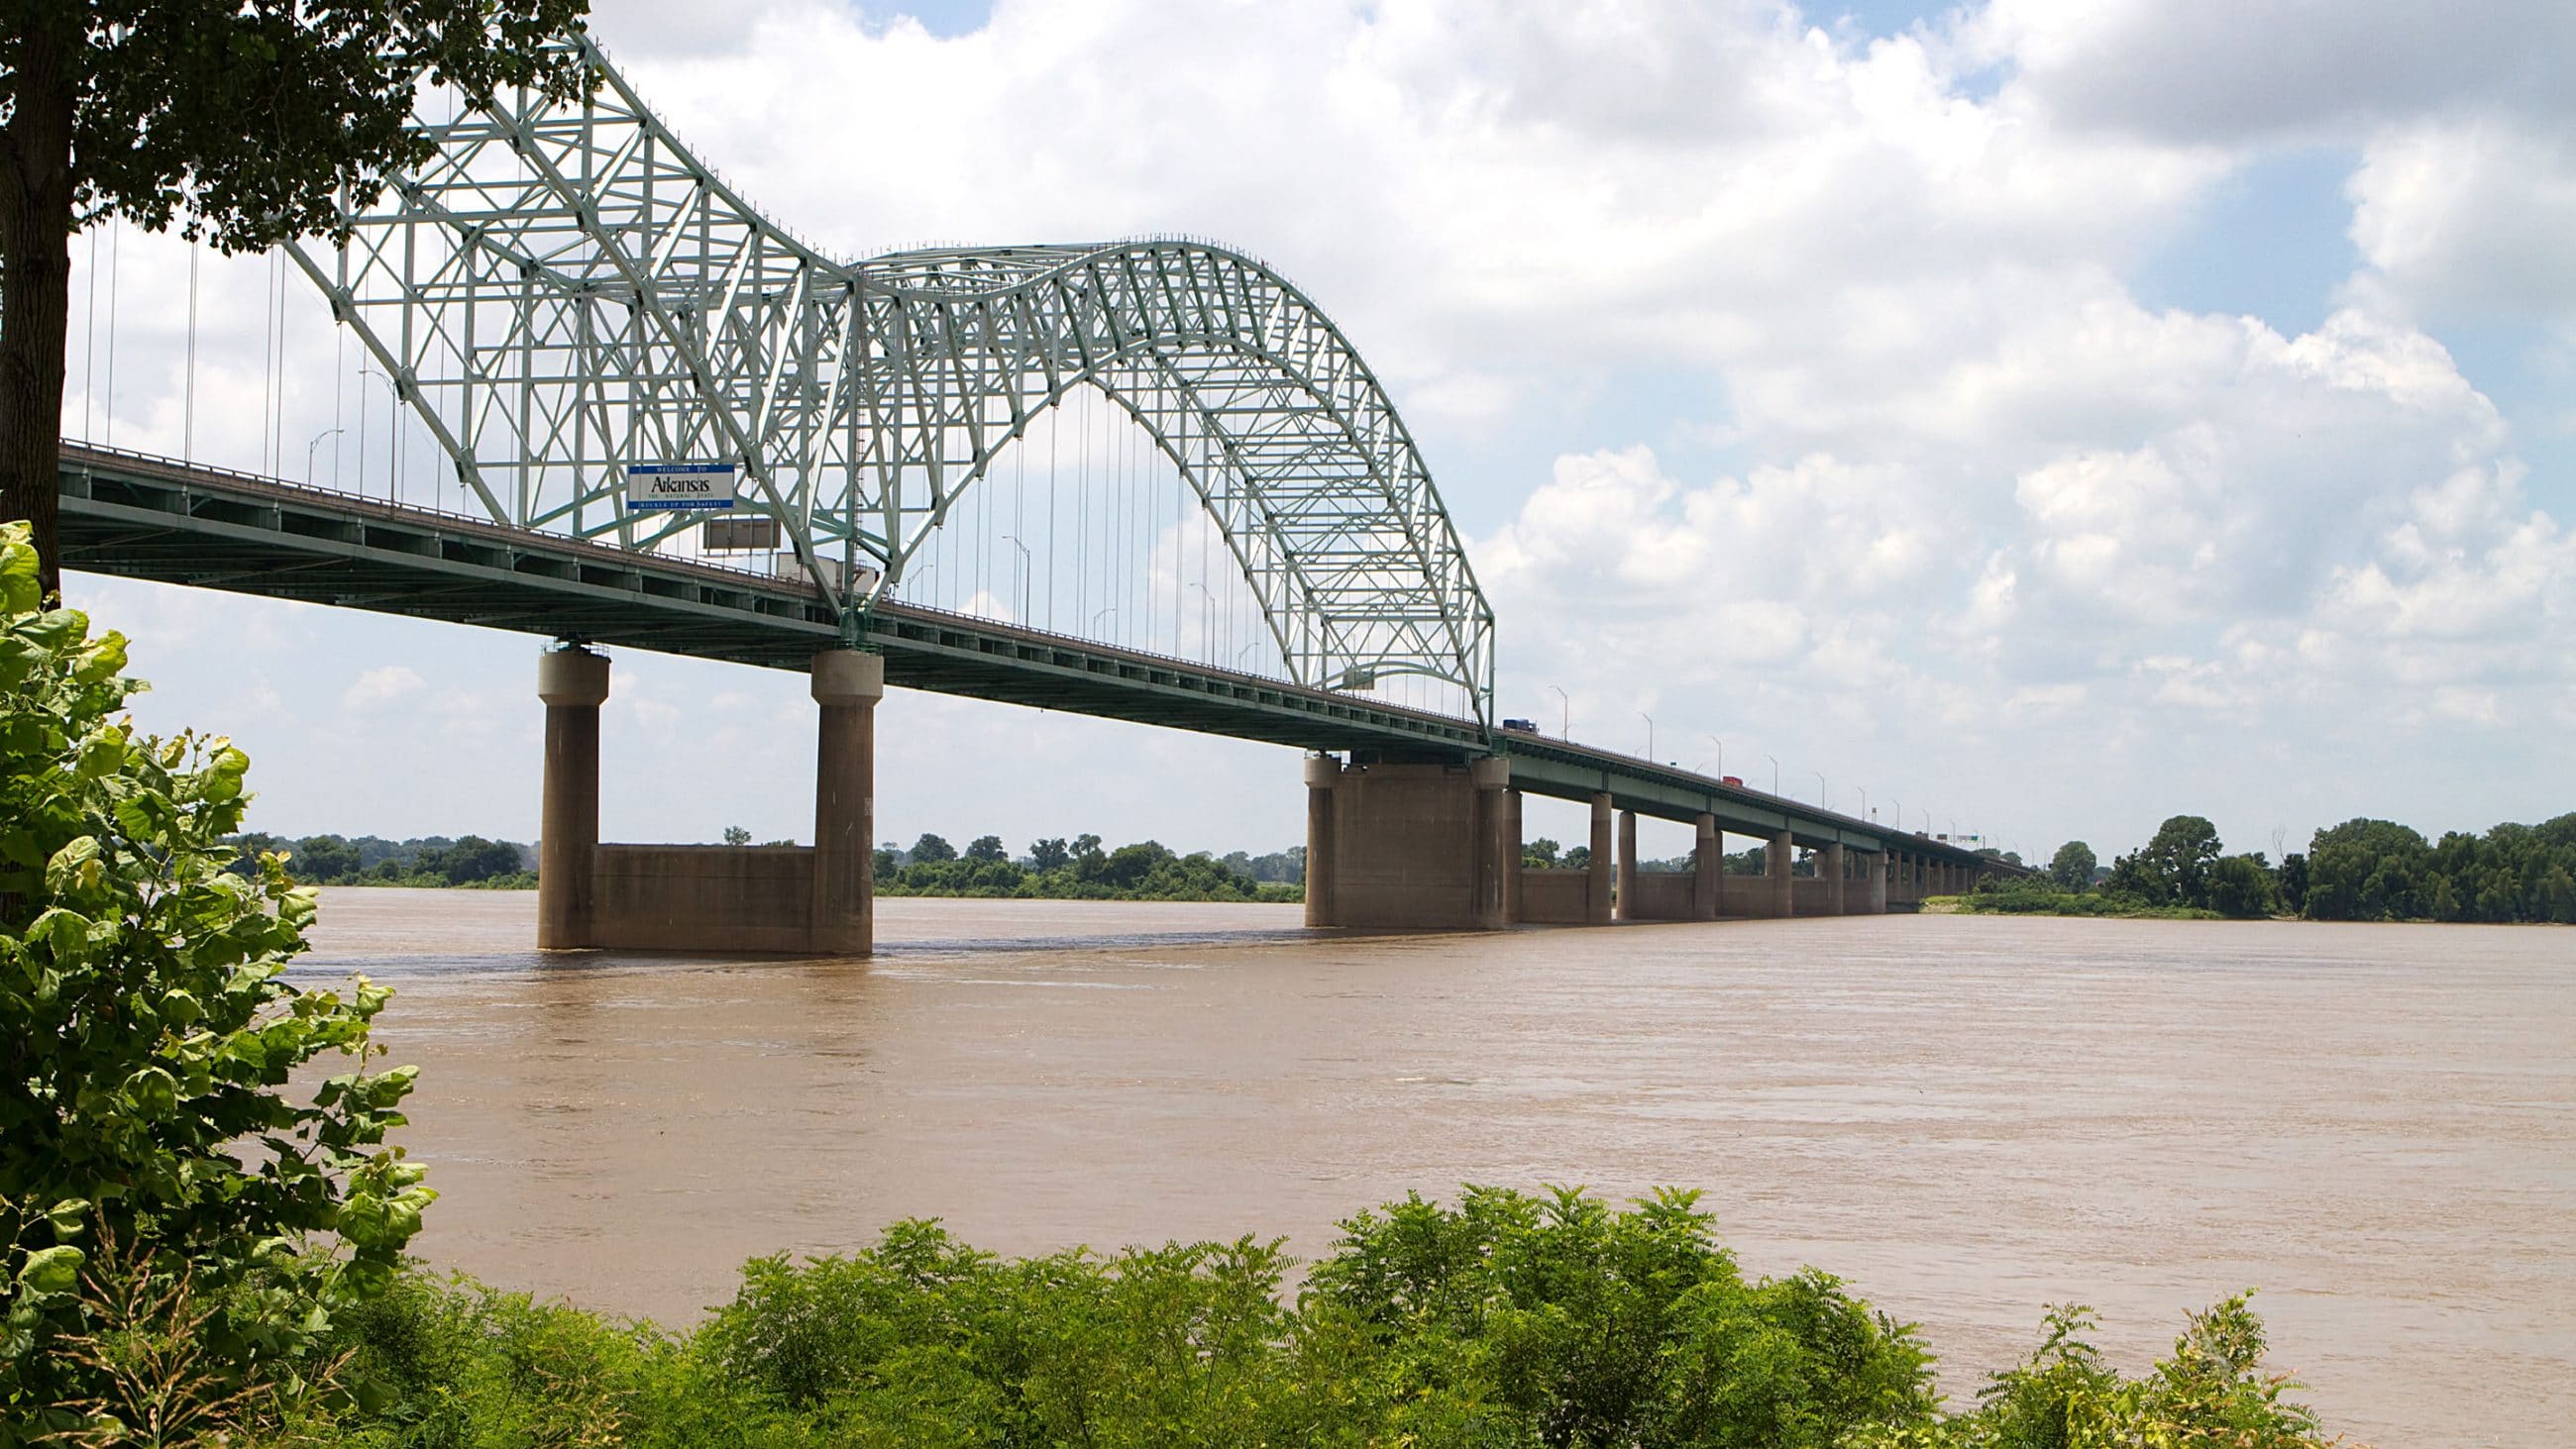 The Interstate 40 bridge over the muddy brown water of the Mississippi River connects Memphis, Tennessee, and West Memphis, Arkansas.